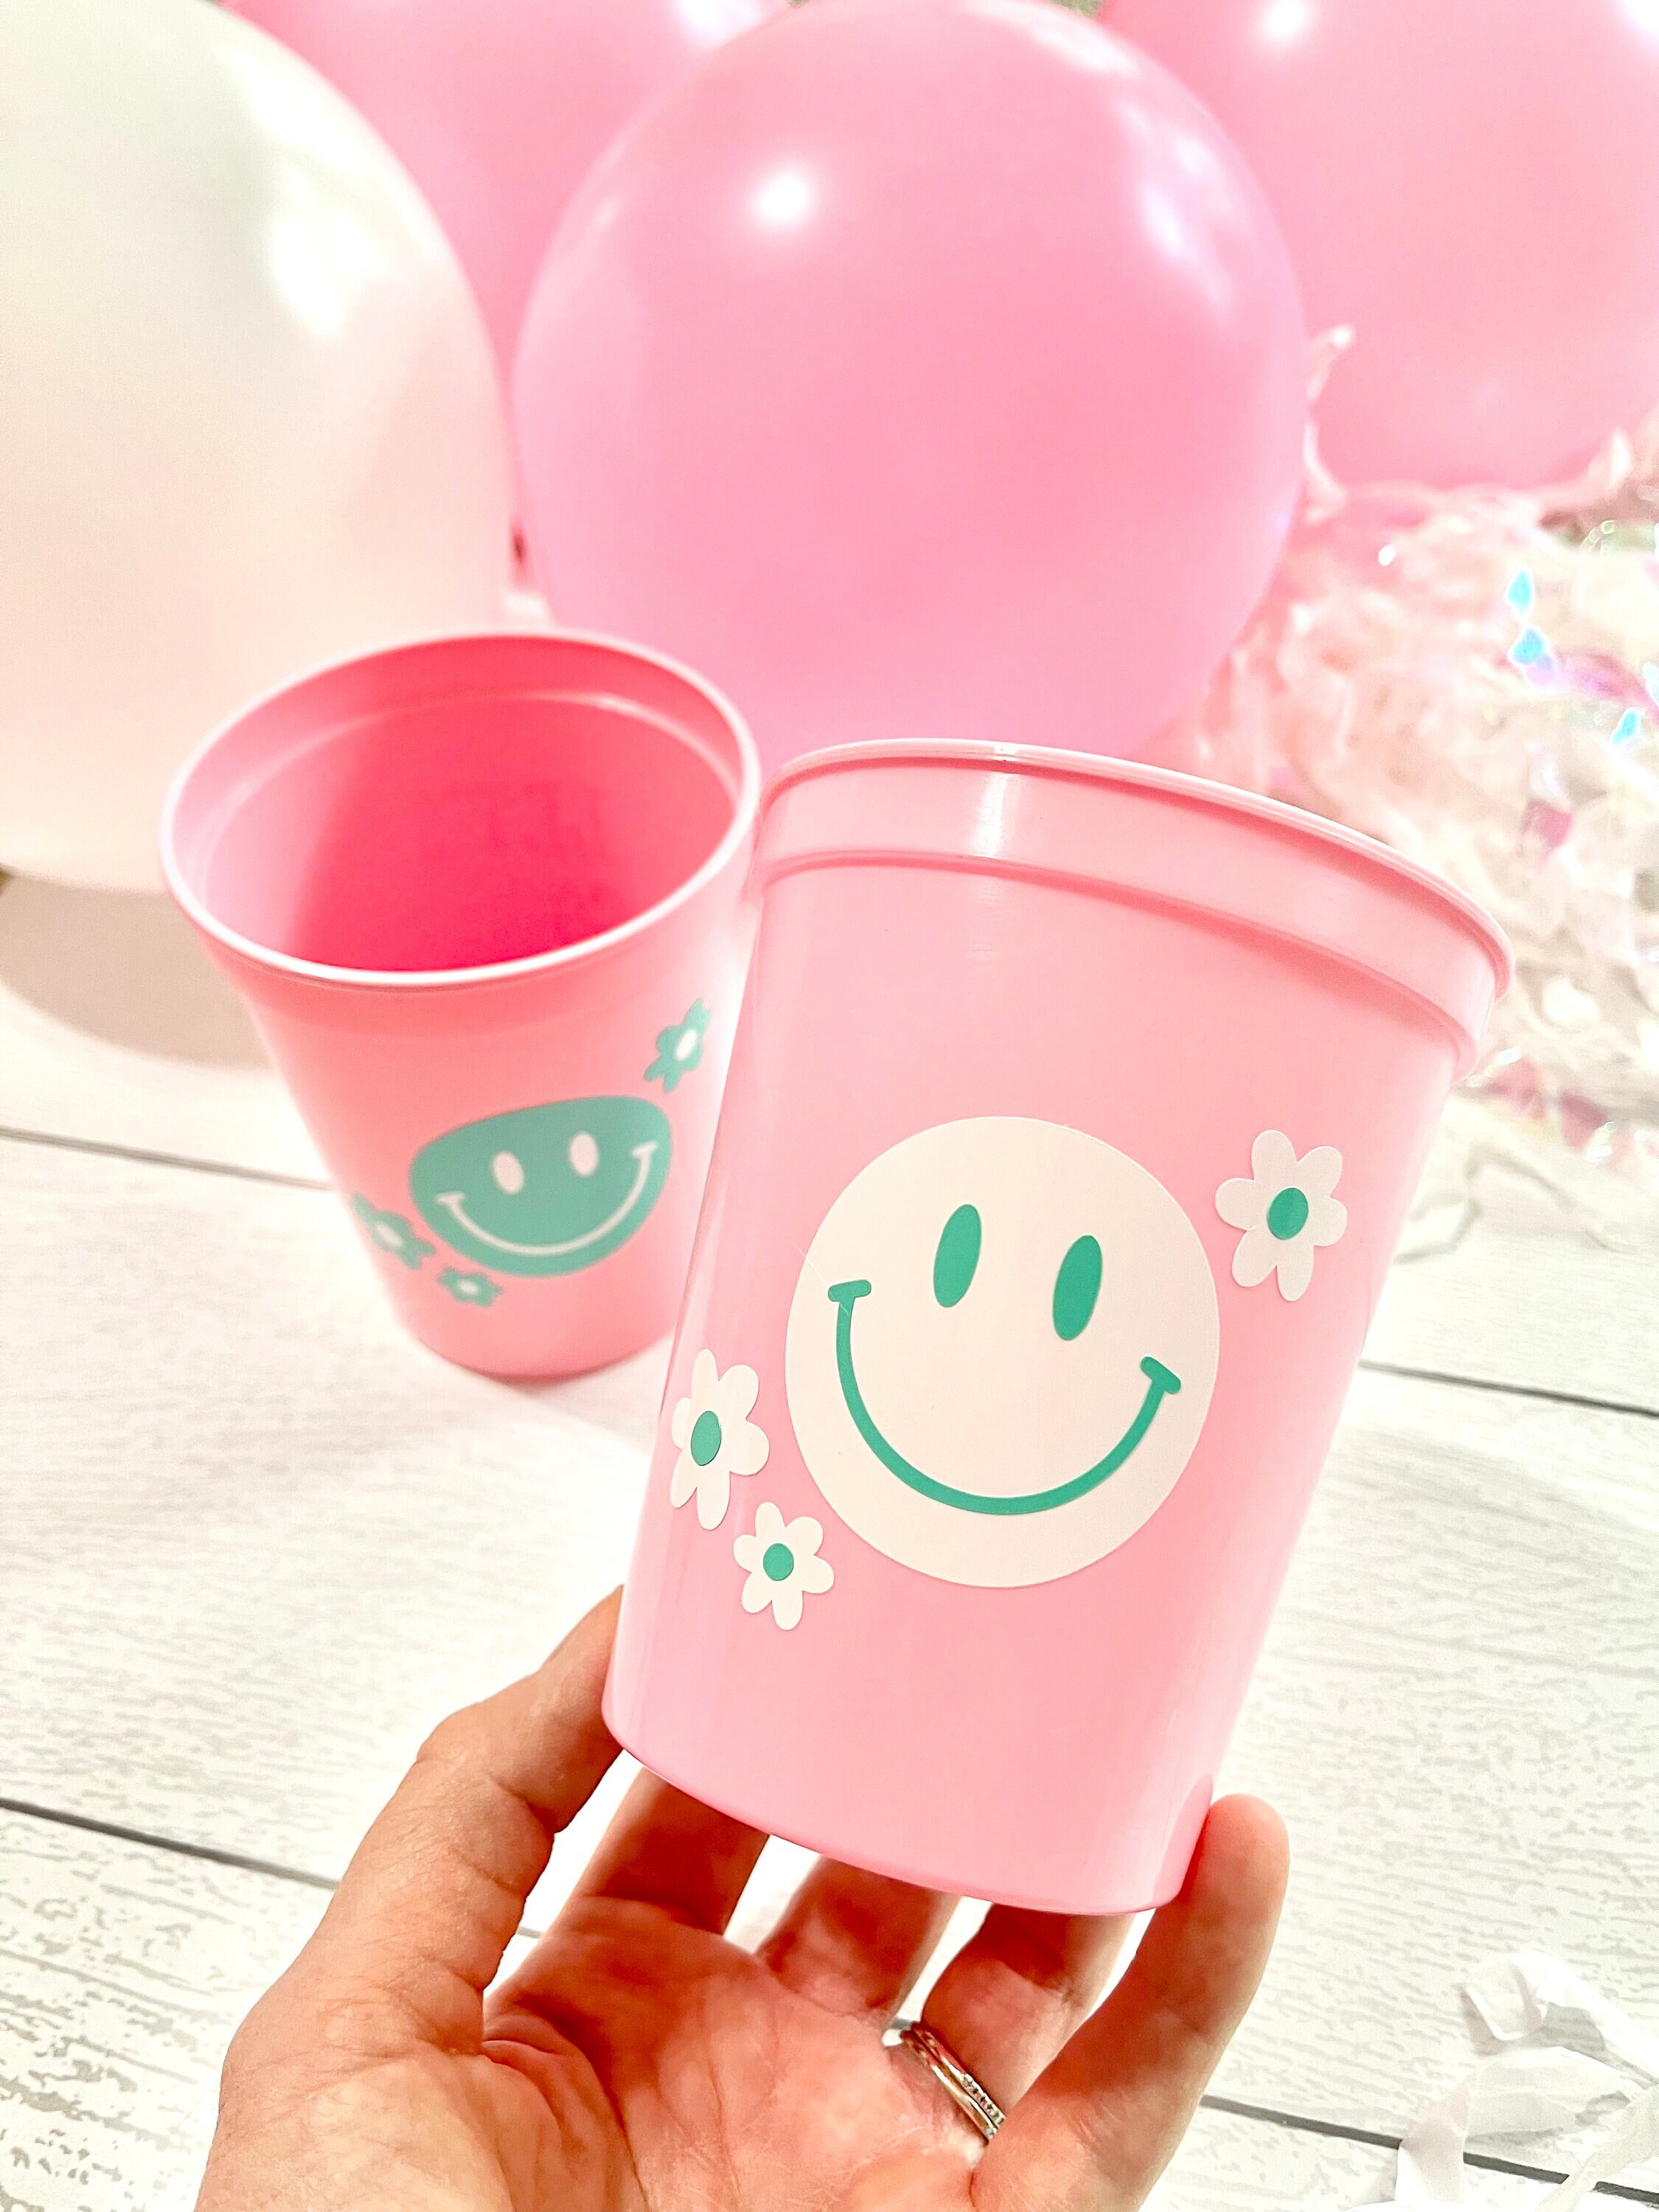  meekoo 100 Pack 12 oz Clear Plastic Cups Disposable Preppy  Smile Pattern Drink Cups Cute Pastel Smile Face Disposable Cups Preppy  Bachelorette Theme Birthday Party Favors Events Picnic Travel : Health